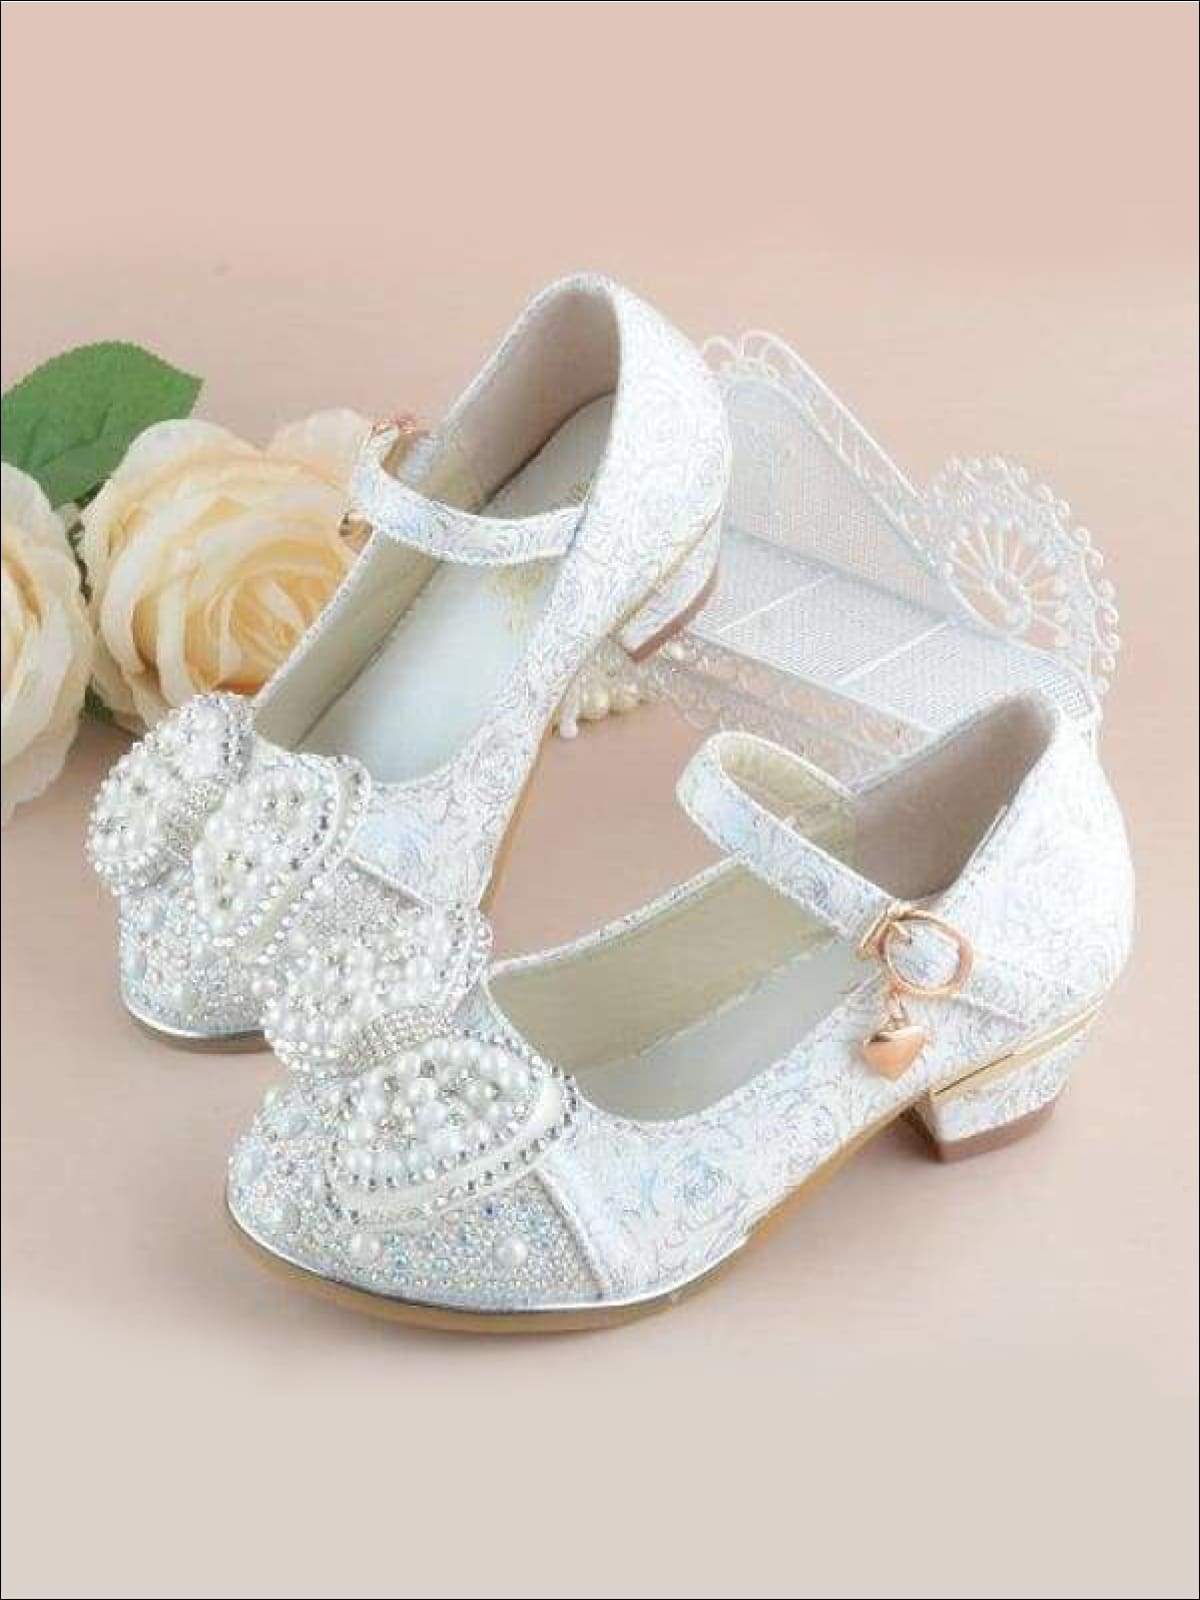 Girls Pearl Embellished Bow Tie Flats with Mini Heel - Ivory / 1 - Girls Flats